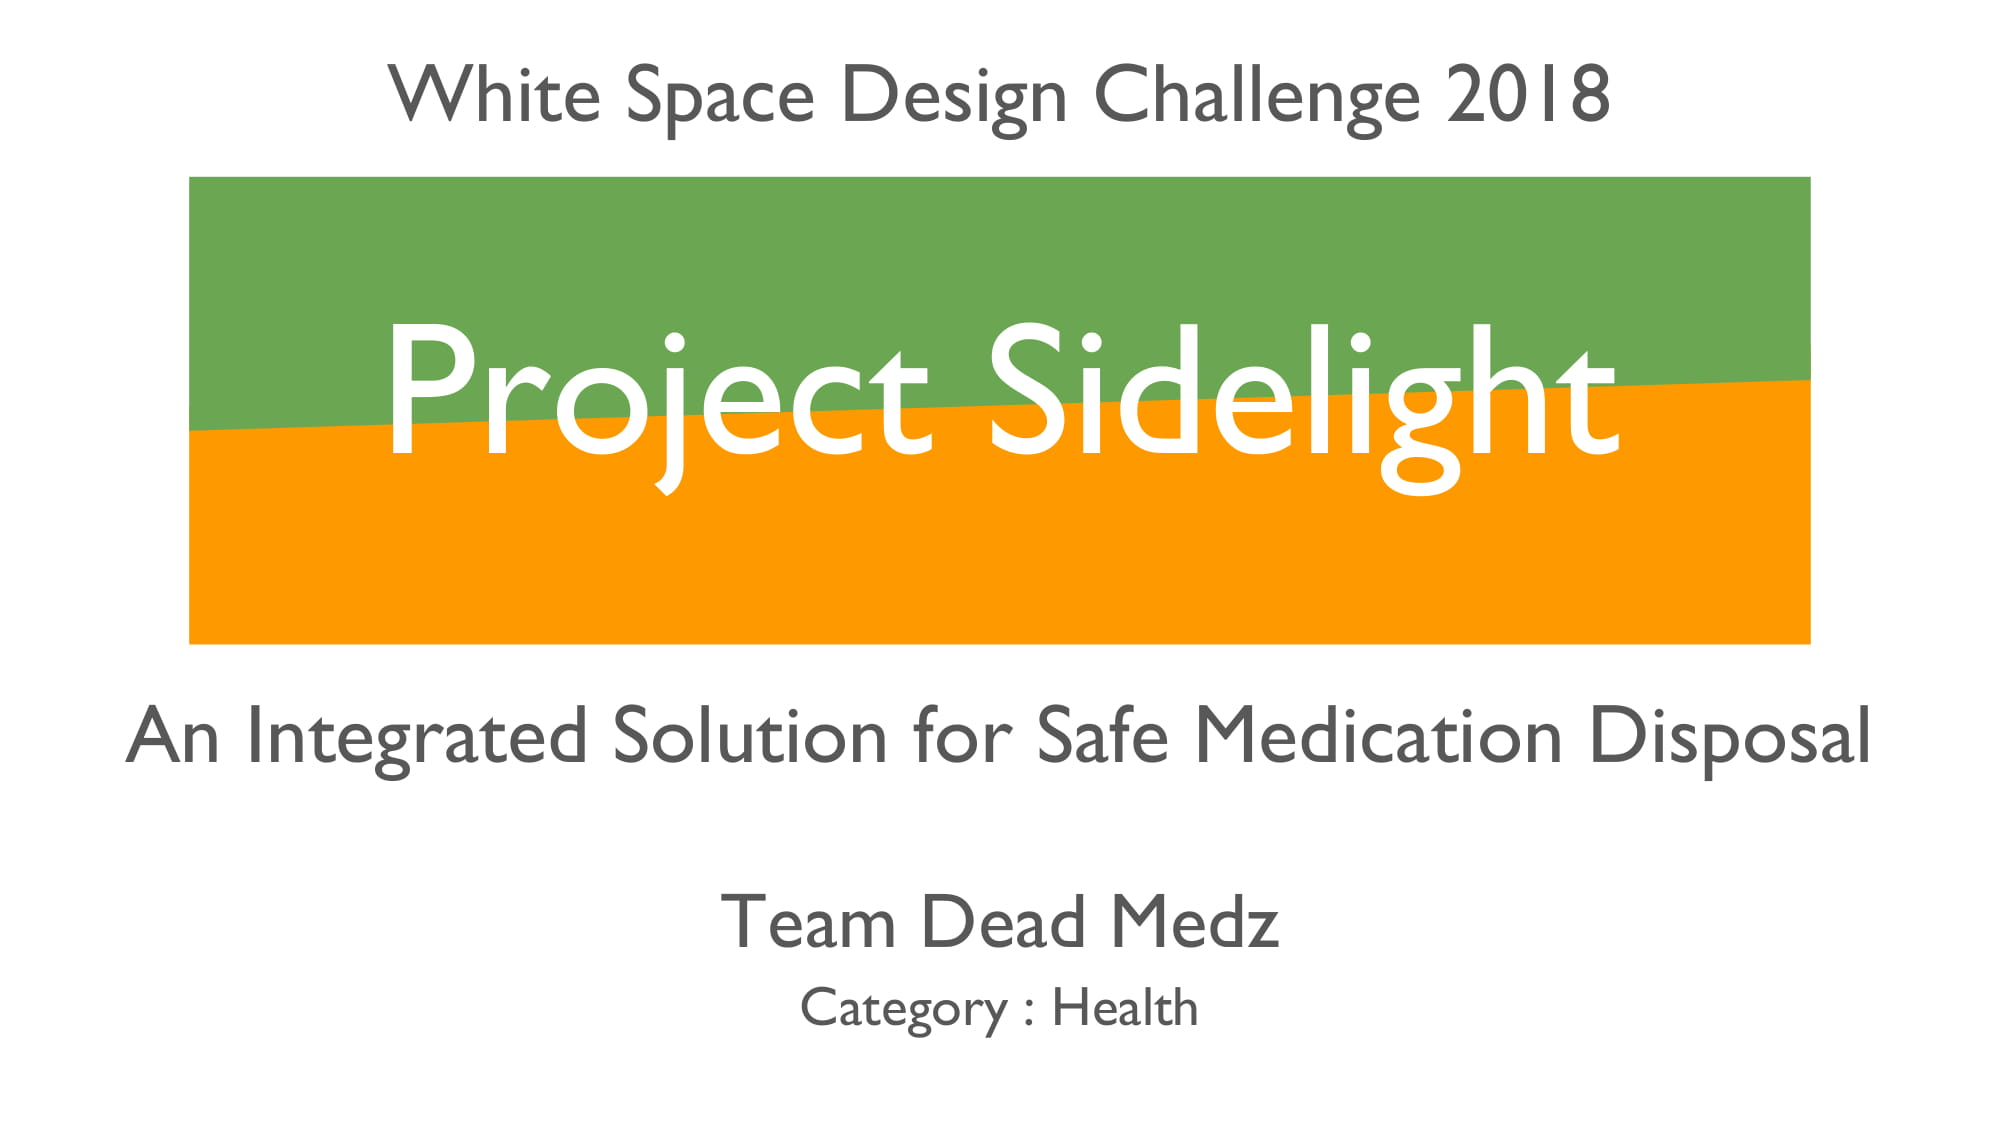 Project Sidelight WSDC Submission 2018-01.jpg